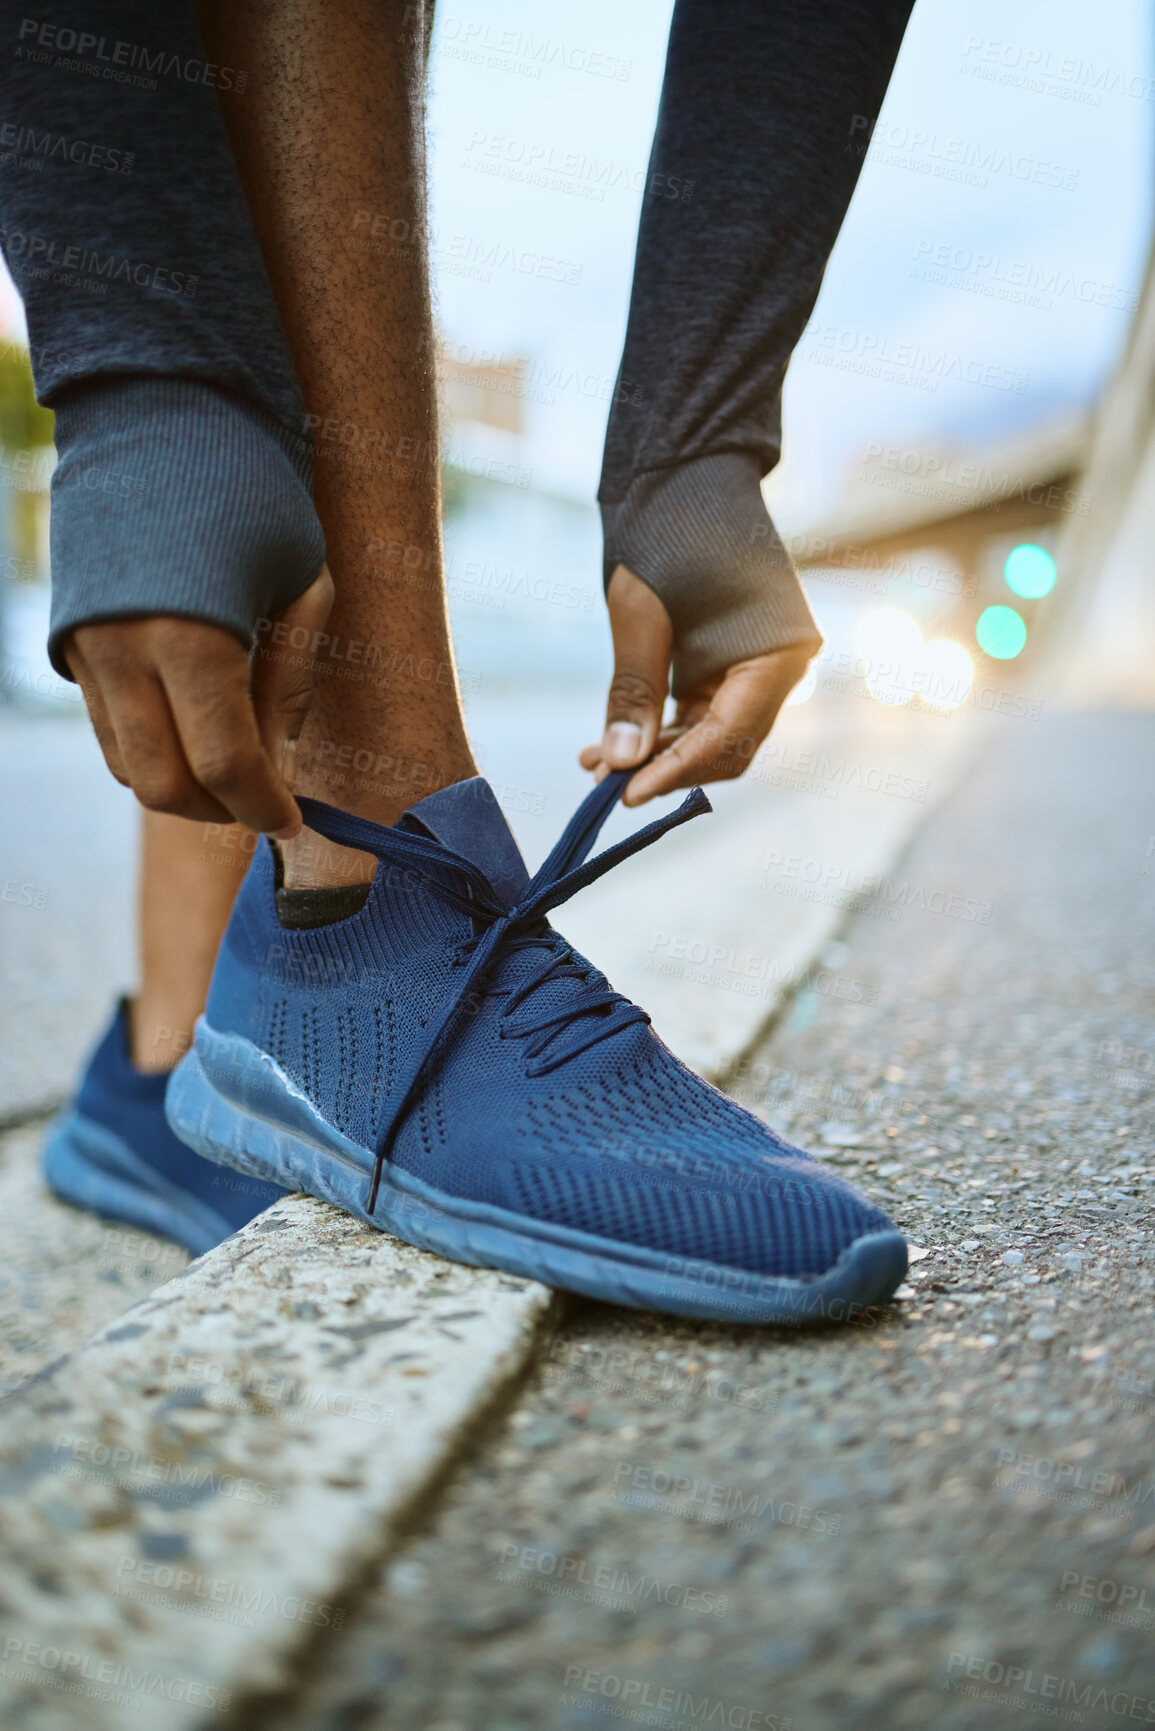 Buy stock photo Workout, fitness and man tying shoes on feet on city street before marathon training or running. Health, wellness and sports footwear, motivation for exercise for black man athlete or urban runner.